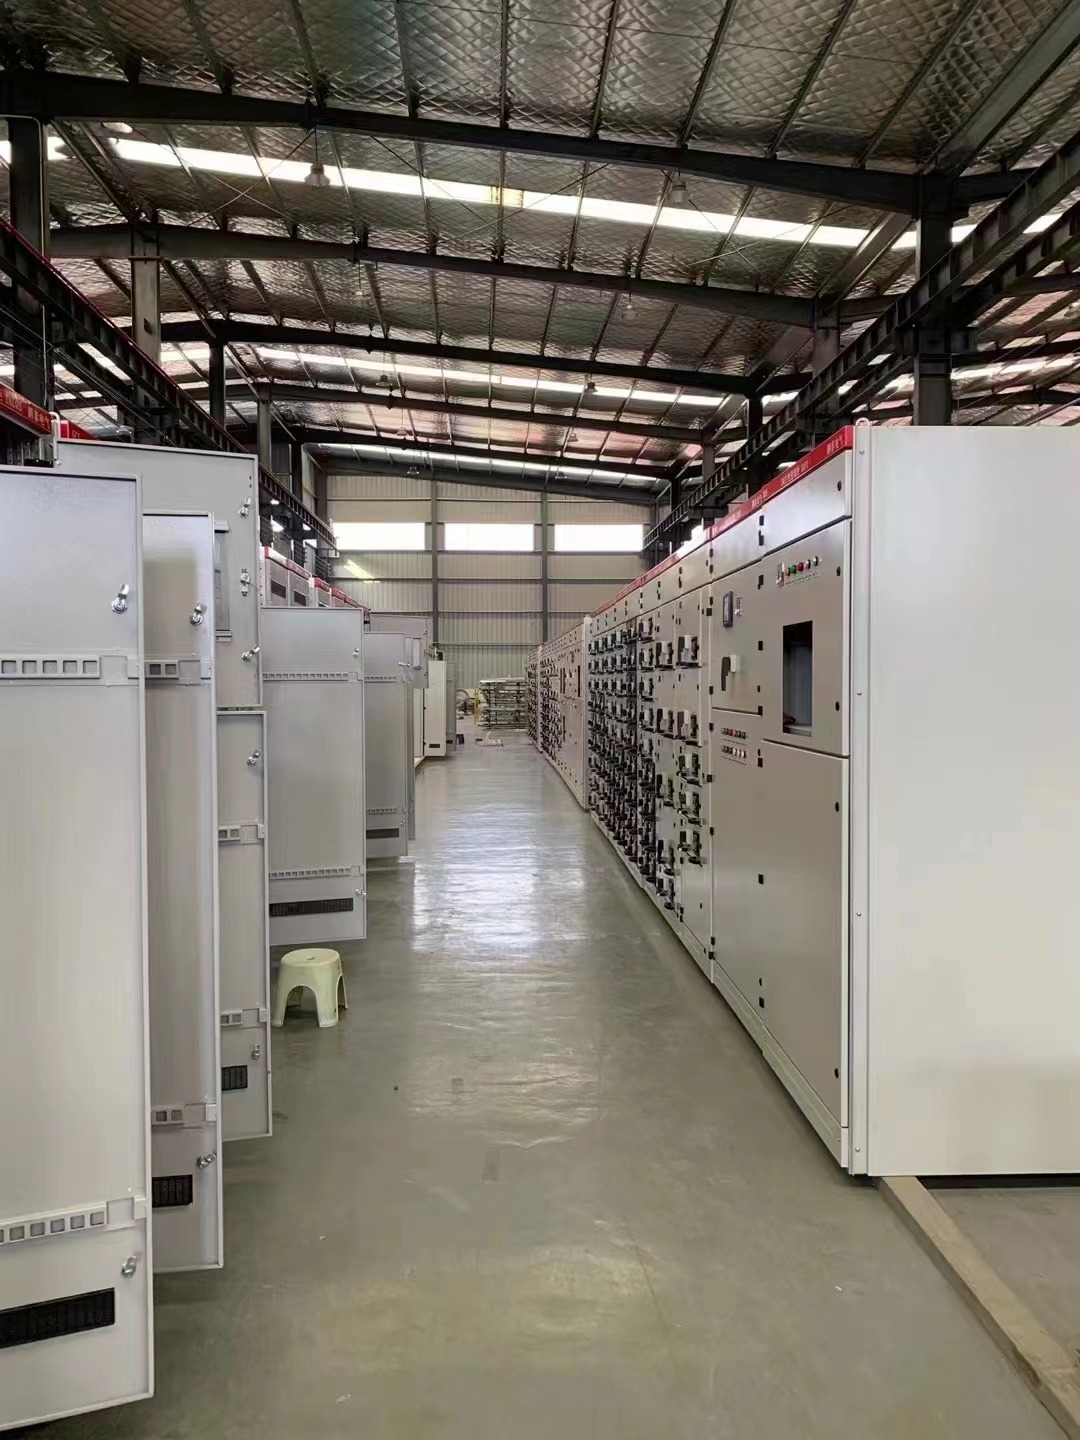 China electrical switchgear factory，price-SPL- power transformer,electrical transformer,Combined compact substation,Metalclad AC Enclosed Switchgear,Low Voltage Switchgear,Indoor AC Metal Clad Intermediate Switchgear,Non-encapsulated Dry-type Power Transformer,Unwrapped coil dry-type transformer,Epoxy resin cast silicon steel sheet dry-type transformer,Epoxy resin cast amorphous alloy dry-type transformer,Amorphous alloy oil-immersed power transformer,Silicon steel sheet oil-immersed power,electric transformer,Distribution Transformer,voltage transformer,step-down transformer,reducing transformer,low-loss power transformer,loss power transformer,Oil-type Transformer,Oil Distribution Transformer,Transformer-Oil-lmmersed,Oil Transformer,Oil Immersed Transformer,three phase oil immersed power transformer,oil filled electrical transformer,Sealed amorphous alloy power transformer,Dry Type Transformer,dry Transformer,Cast Resin Dry Type Transformer,dry-type transformer,resin-casting type transformer,resinated dry type transformer,CRDT,Unwrapped coil power transformer,three phase dry Transformer,articulated unit substation,AS,Modular substation,transformer substation,electric substation,Power Sub-station,Preinstalled substation,YBM,prefabricated substation,Distribution Substation,compact substation,MV power stations,LV power stations,HV power stations,Switchgear Cabinet,MV Switchgear Cabinet,LV Switchgear Cabinet,HV Switchgear Cabinet,pull-out switch cabinet,Ac metal closed ring network switchgear,Indoor metal armored central switchgear,Box-type substation,custom transformers,customized transformers,Metal enclosed electrical switchgear,LV Switchgear Cabinet,